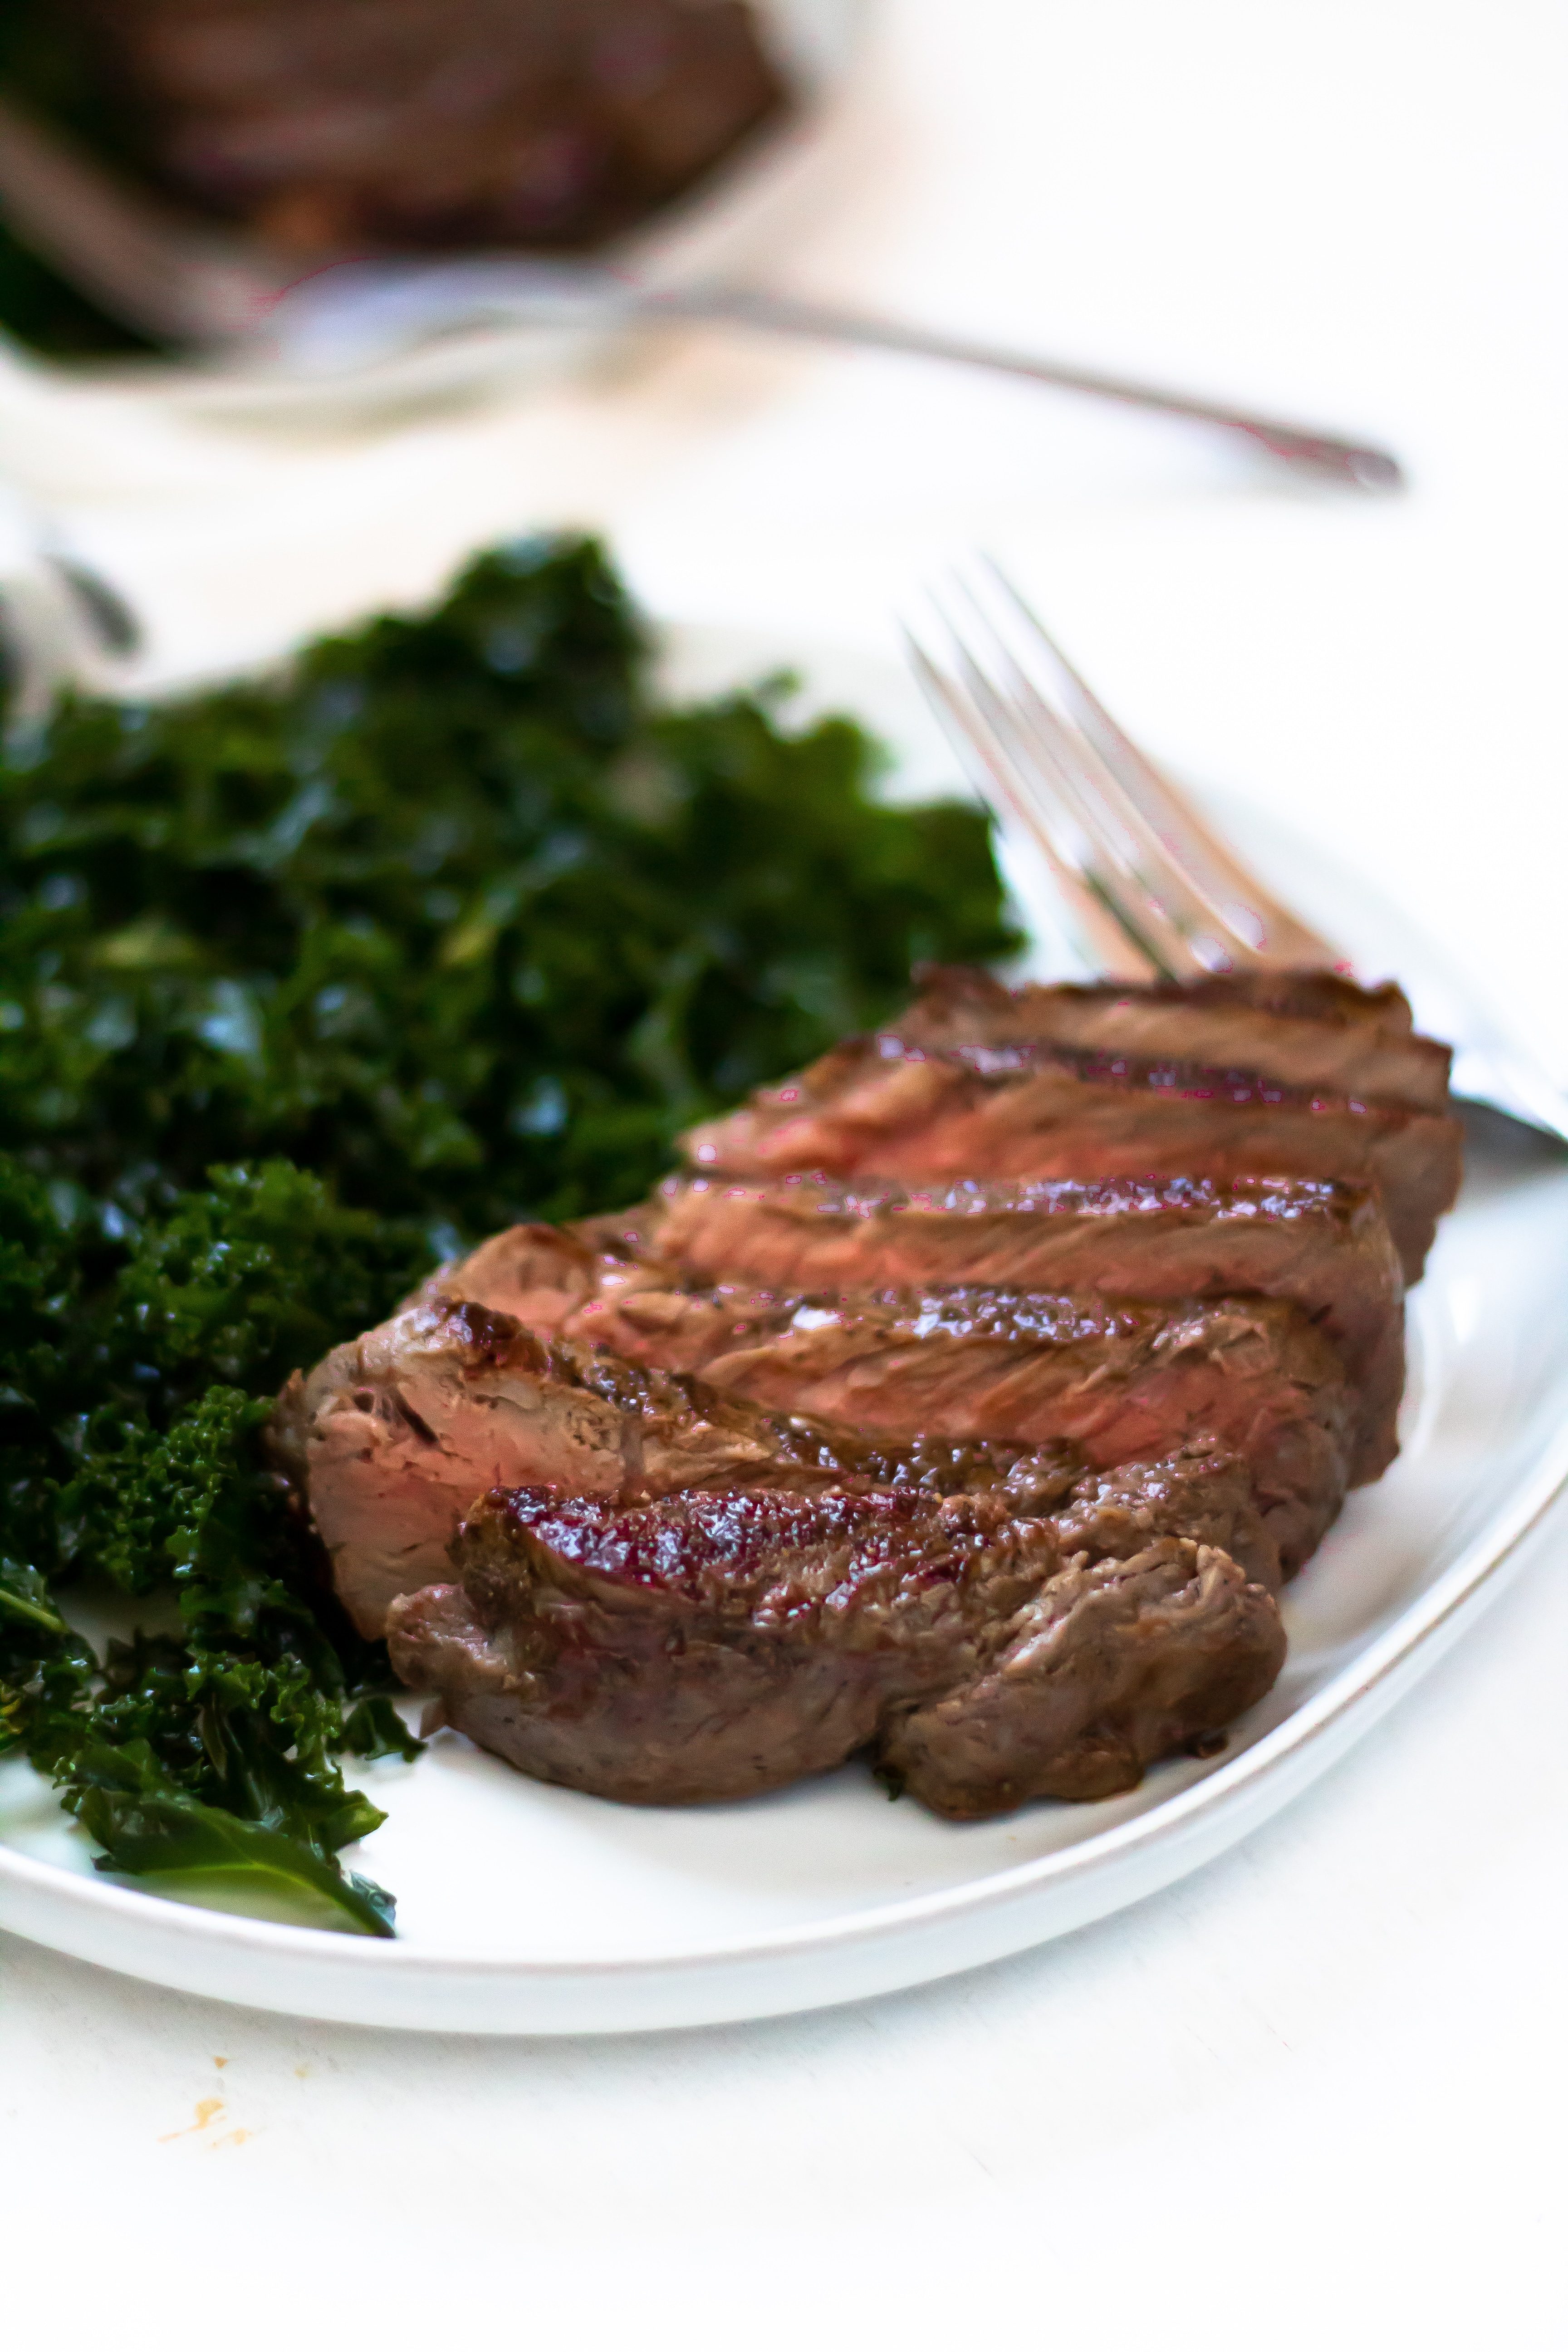 A seared and sliced cast iron skillet steak on a white plate with massaged kale salad.